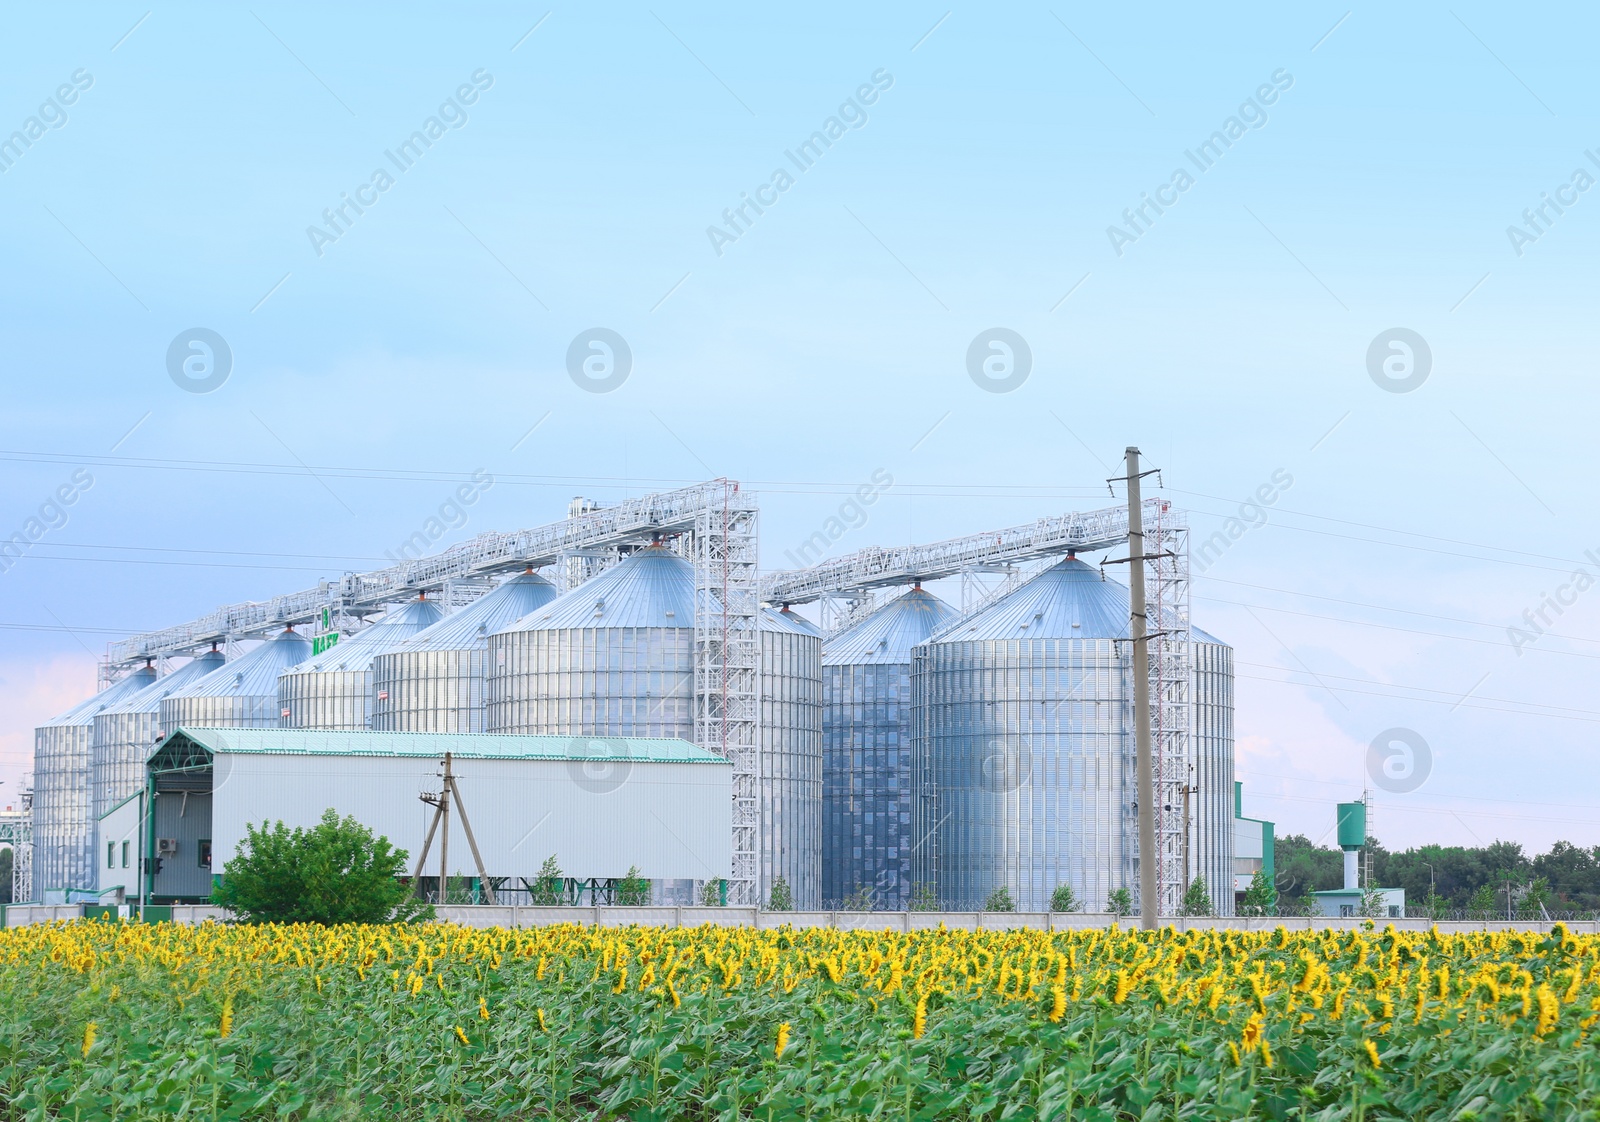 Photo of Row of modern granaries for storing cereal grains in field